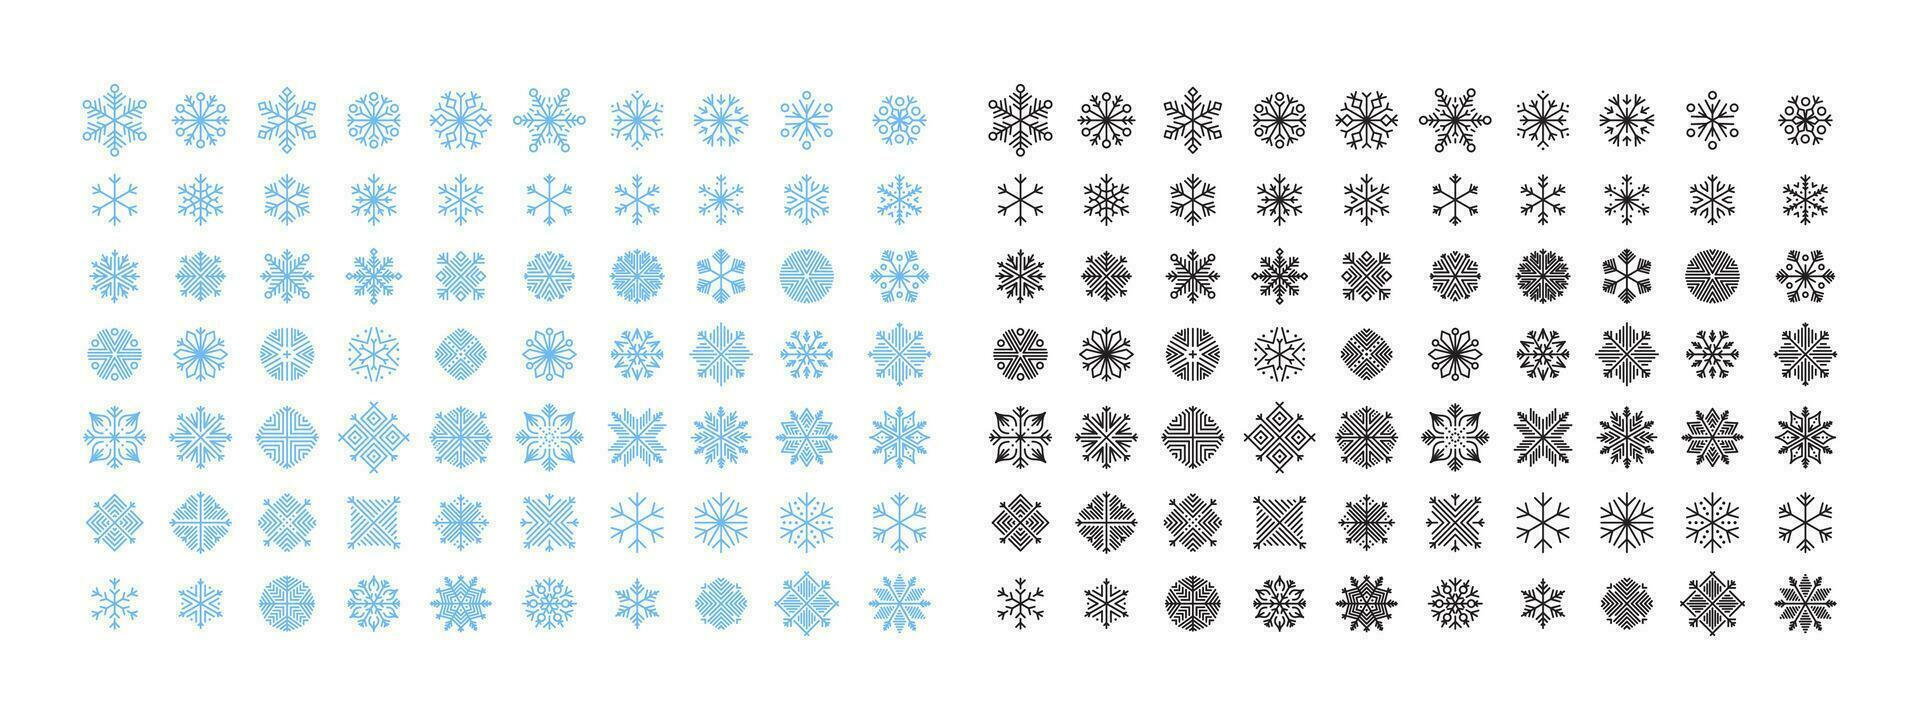 Snowflakes big set. Blue and black snowflakes icons. Snowflakes different icons. Vector scalable graphics